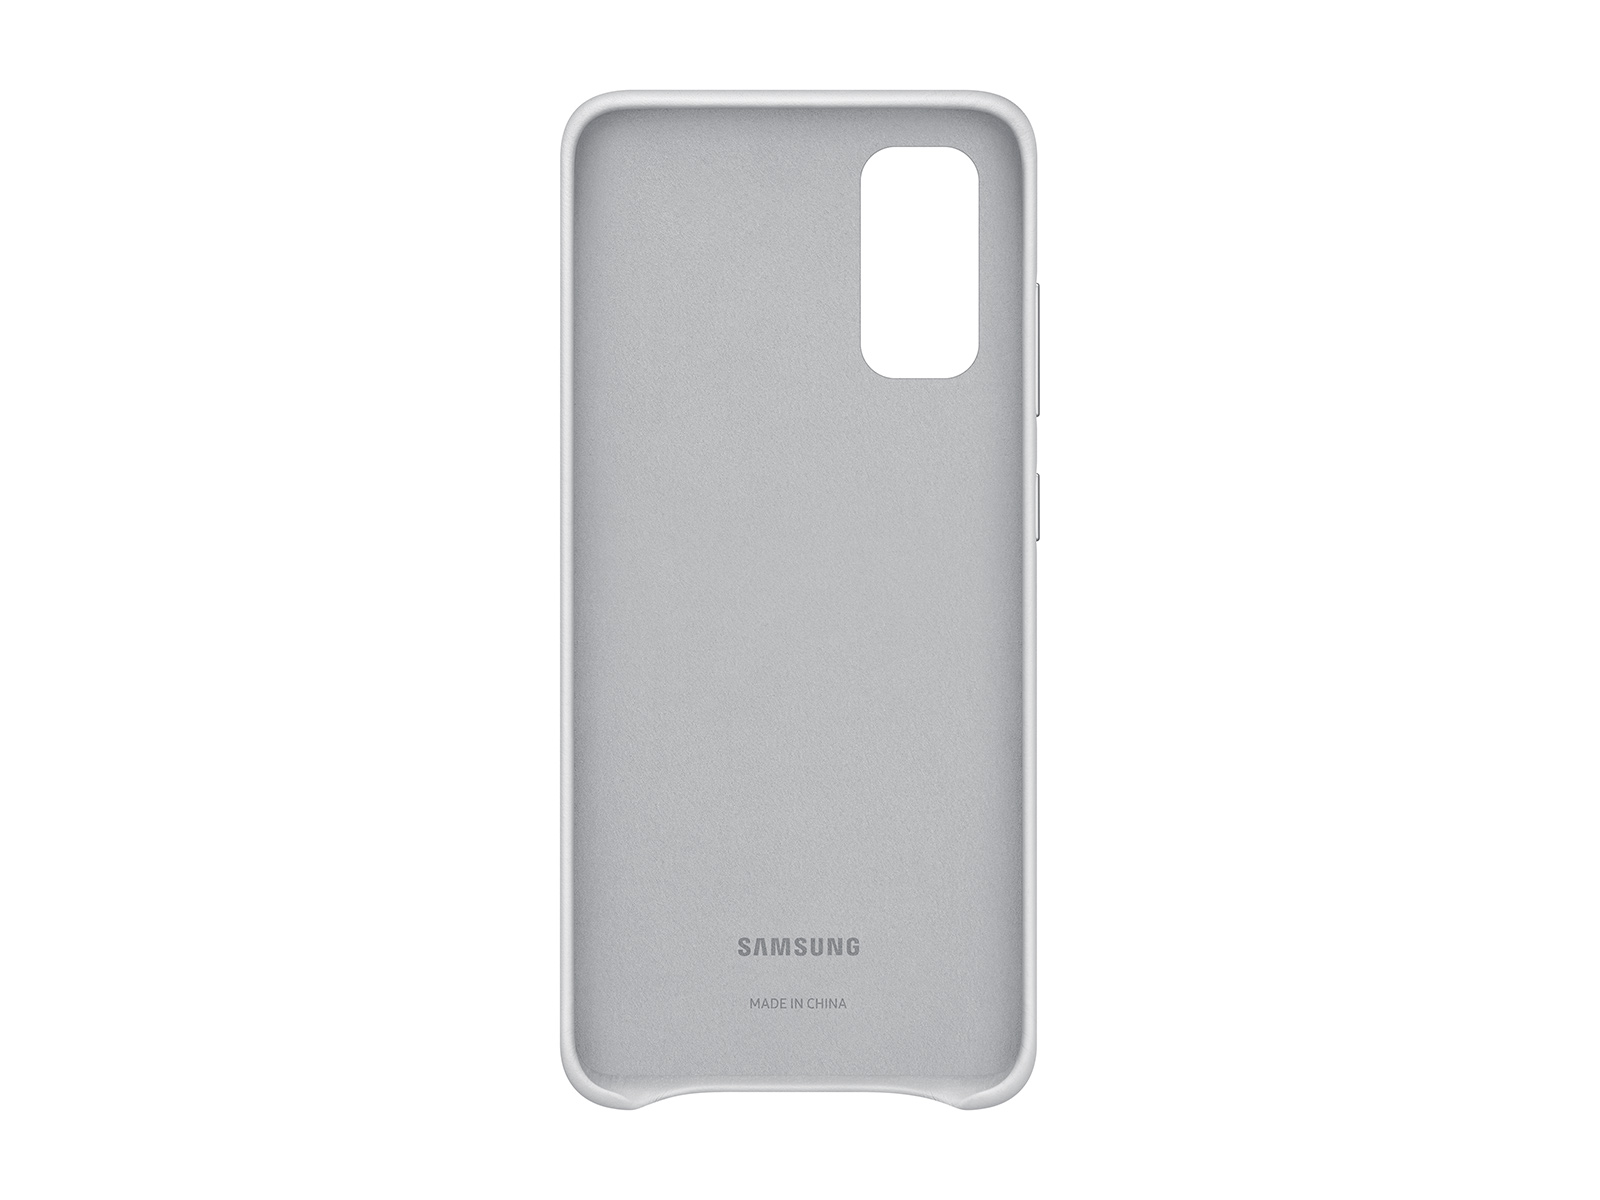 Thumbnail image of Galaxy S20 5G Leather Cover, Silver